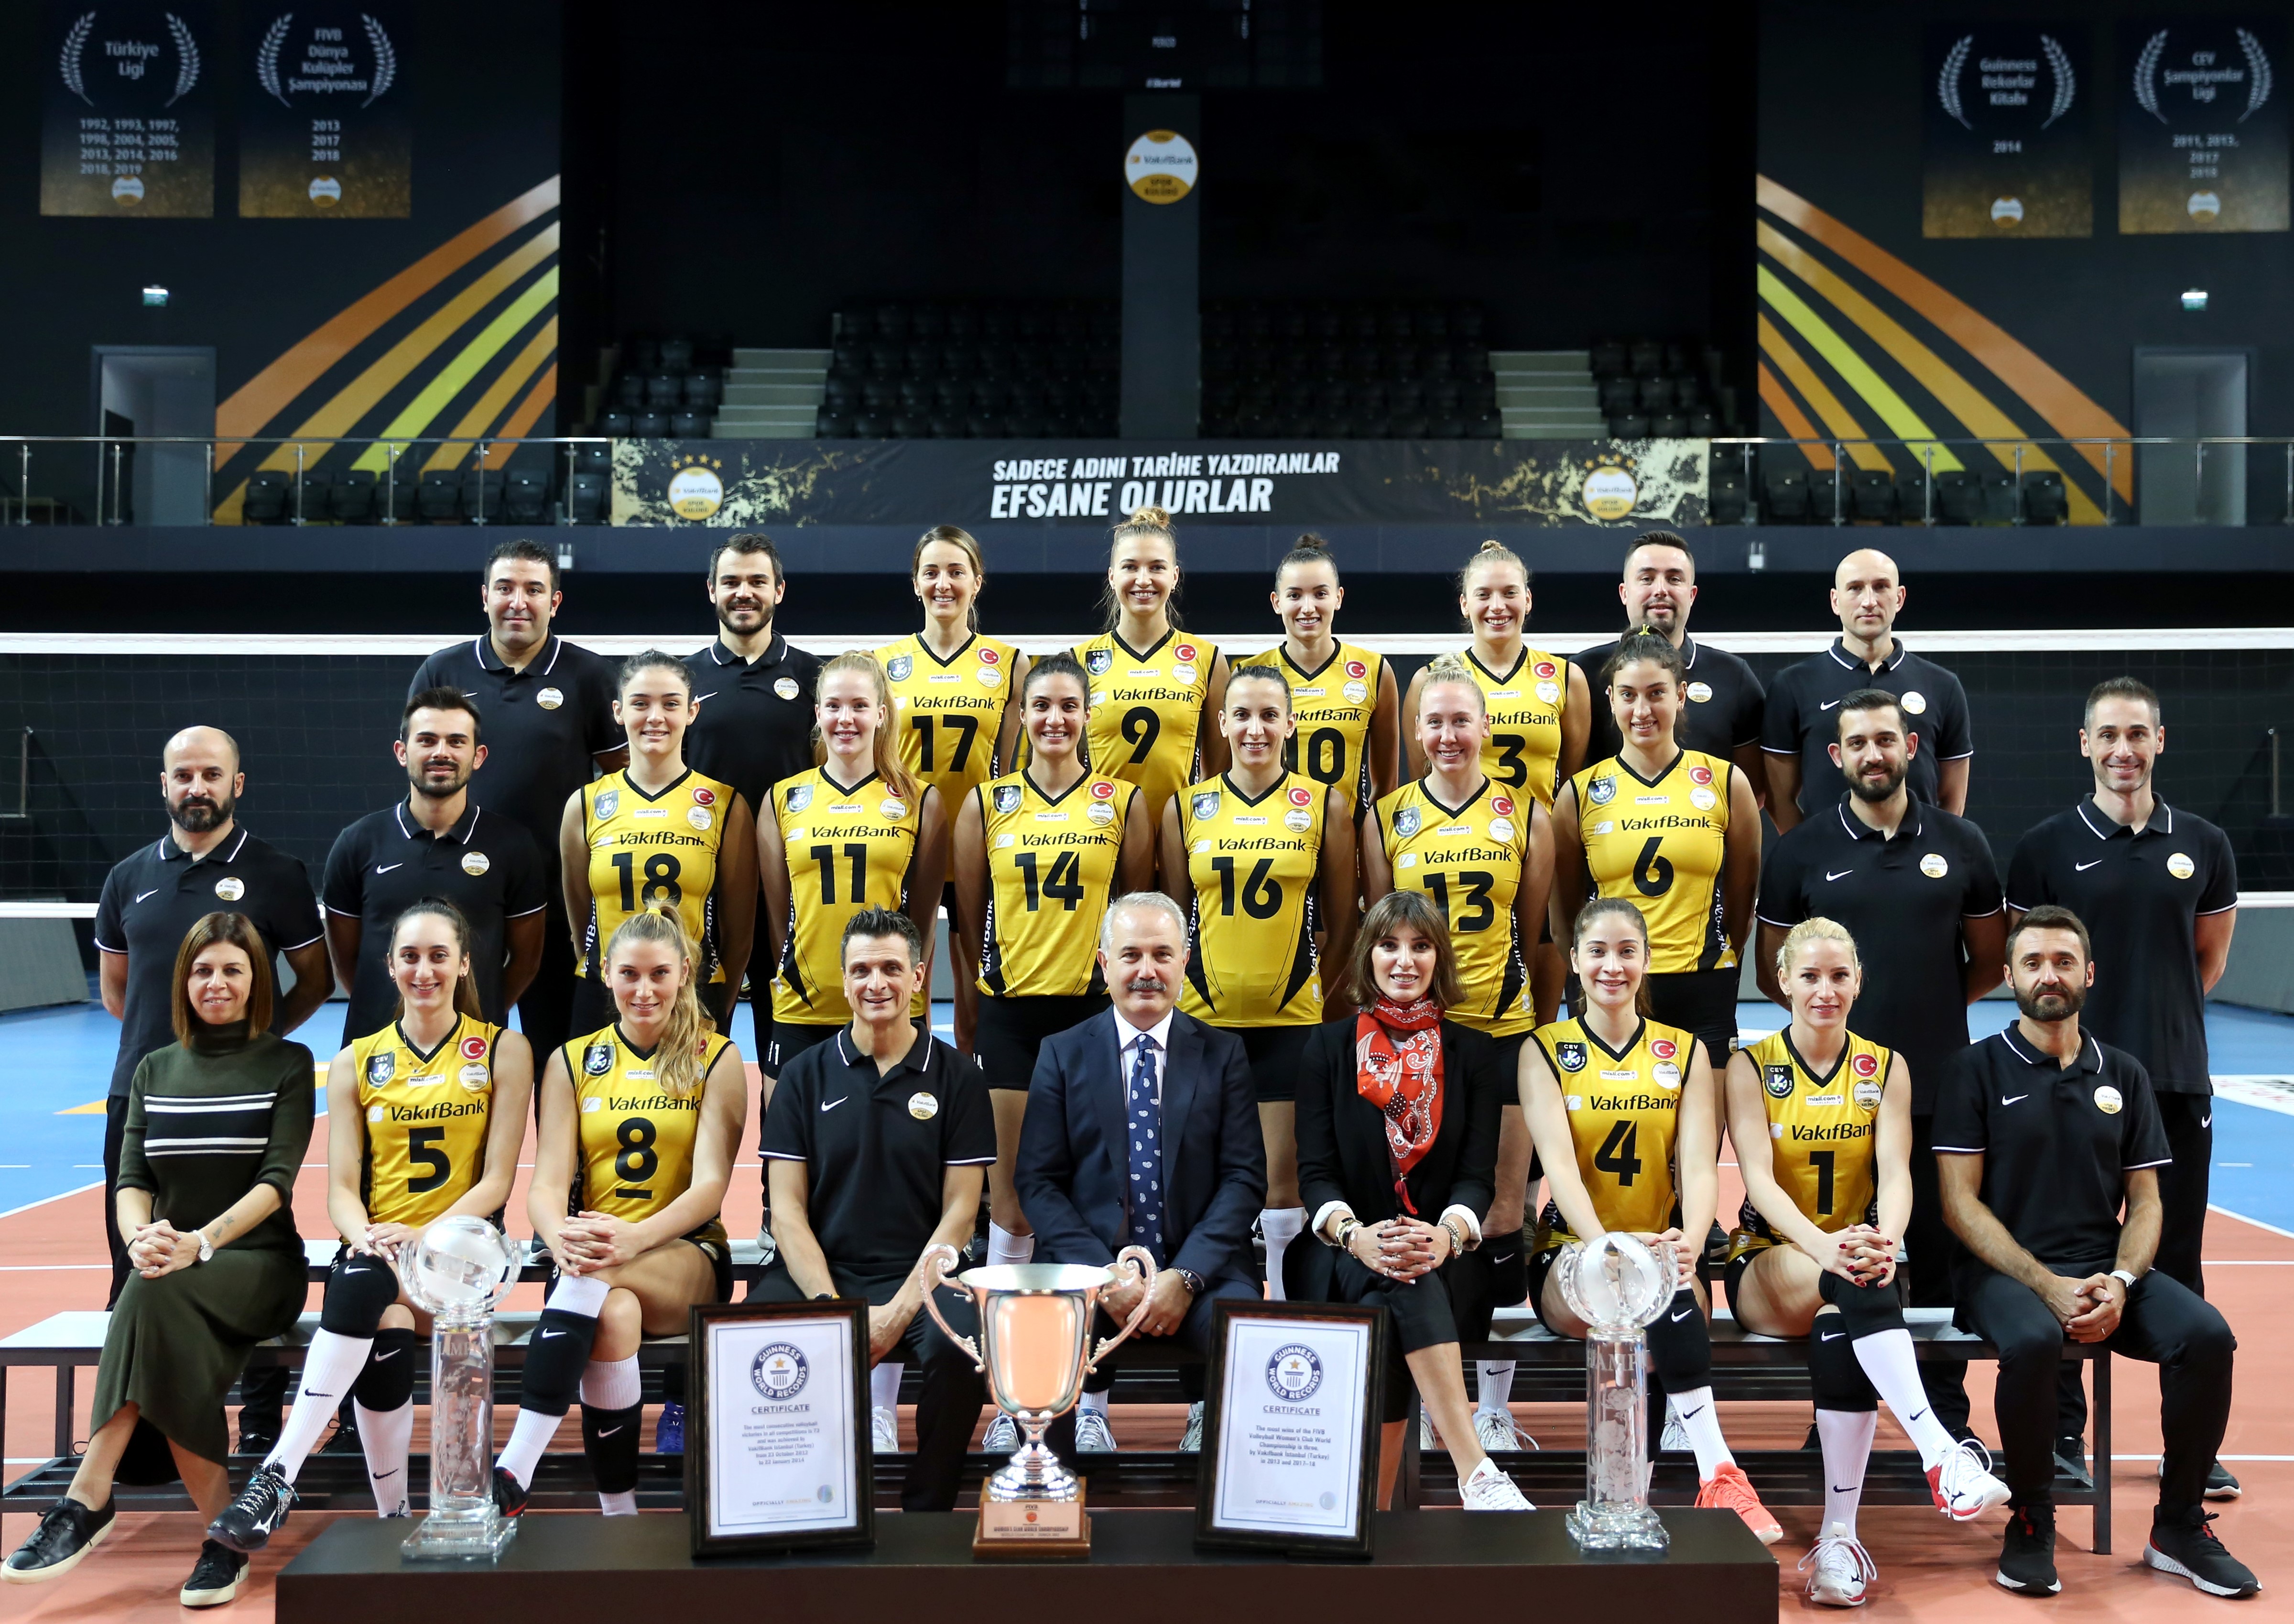 vakifbank enters guinness world records for a second time insidecev